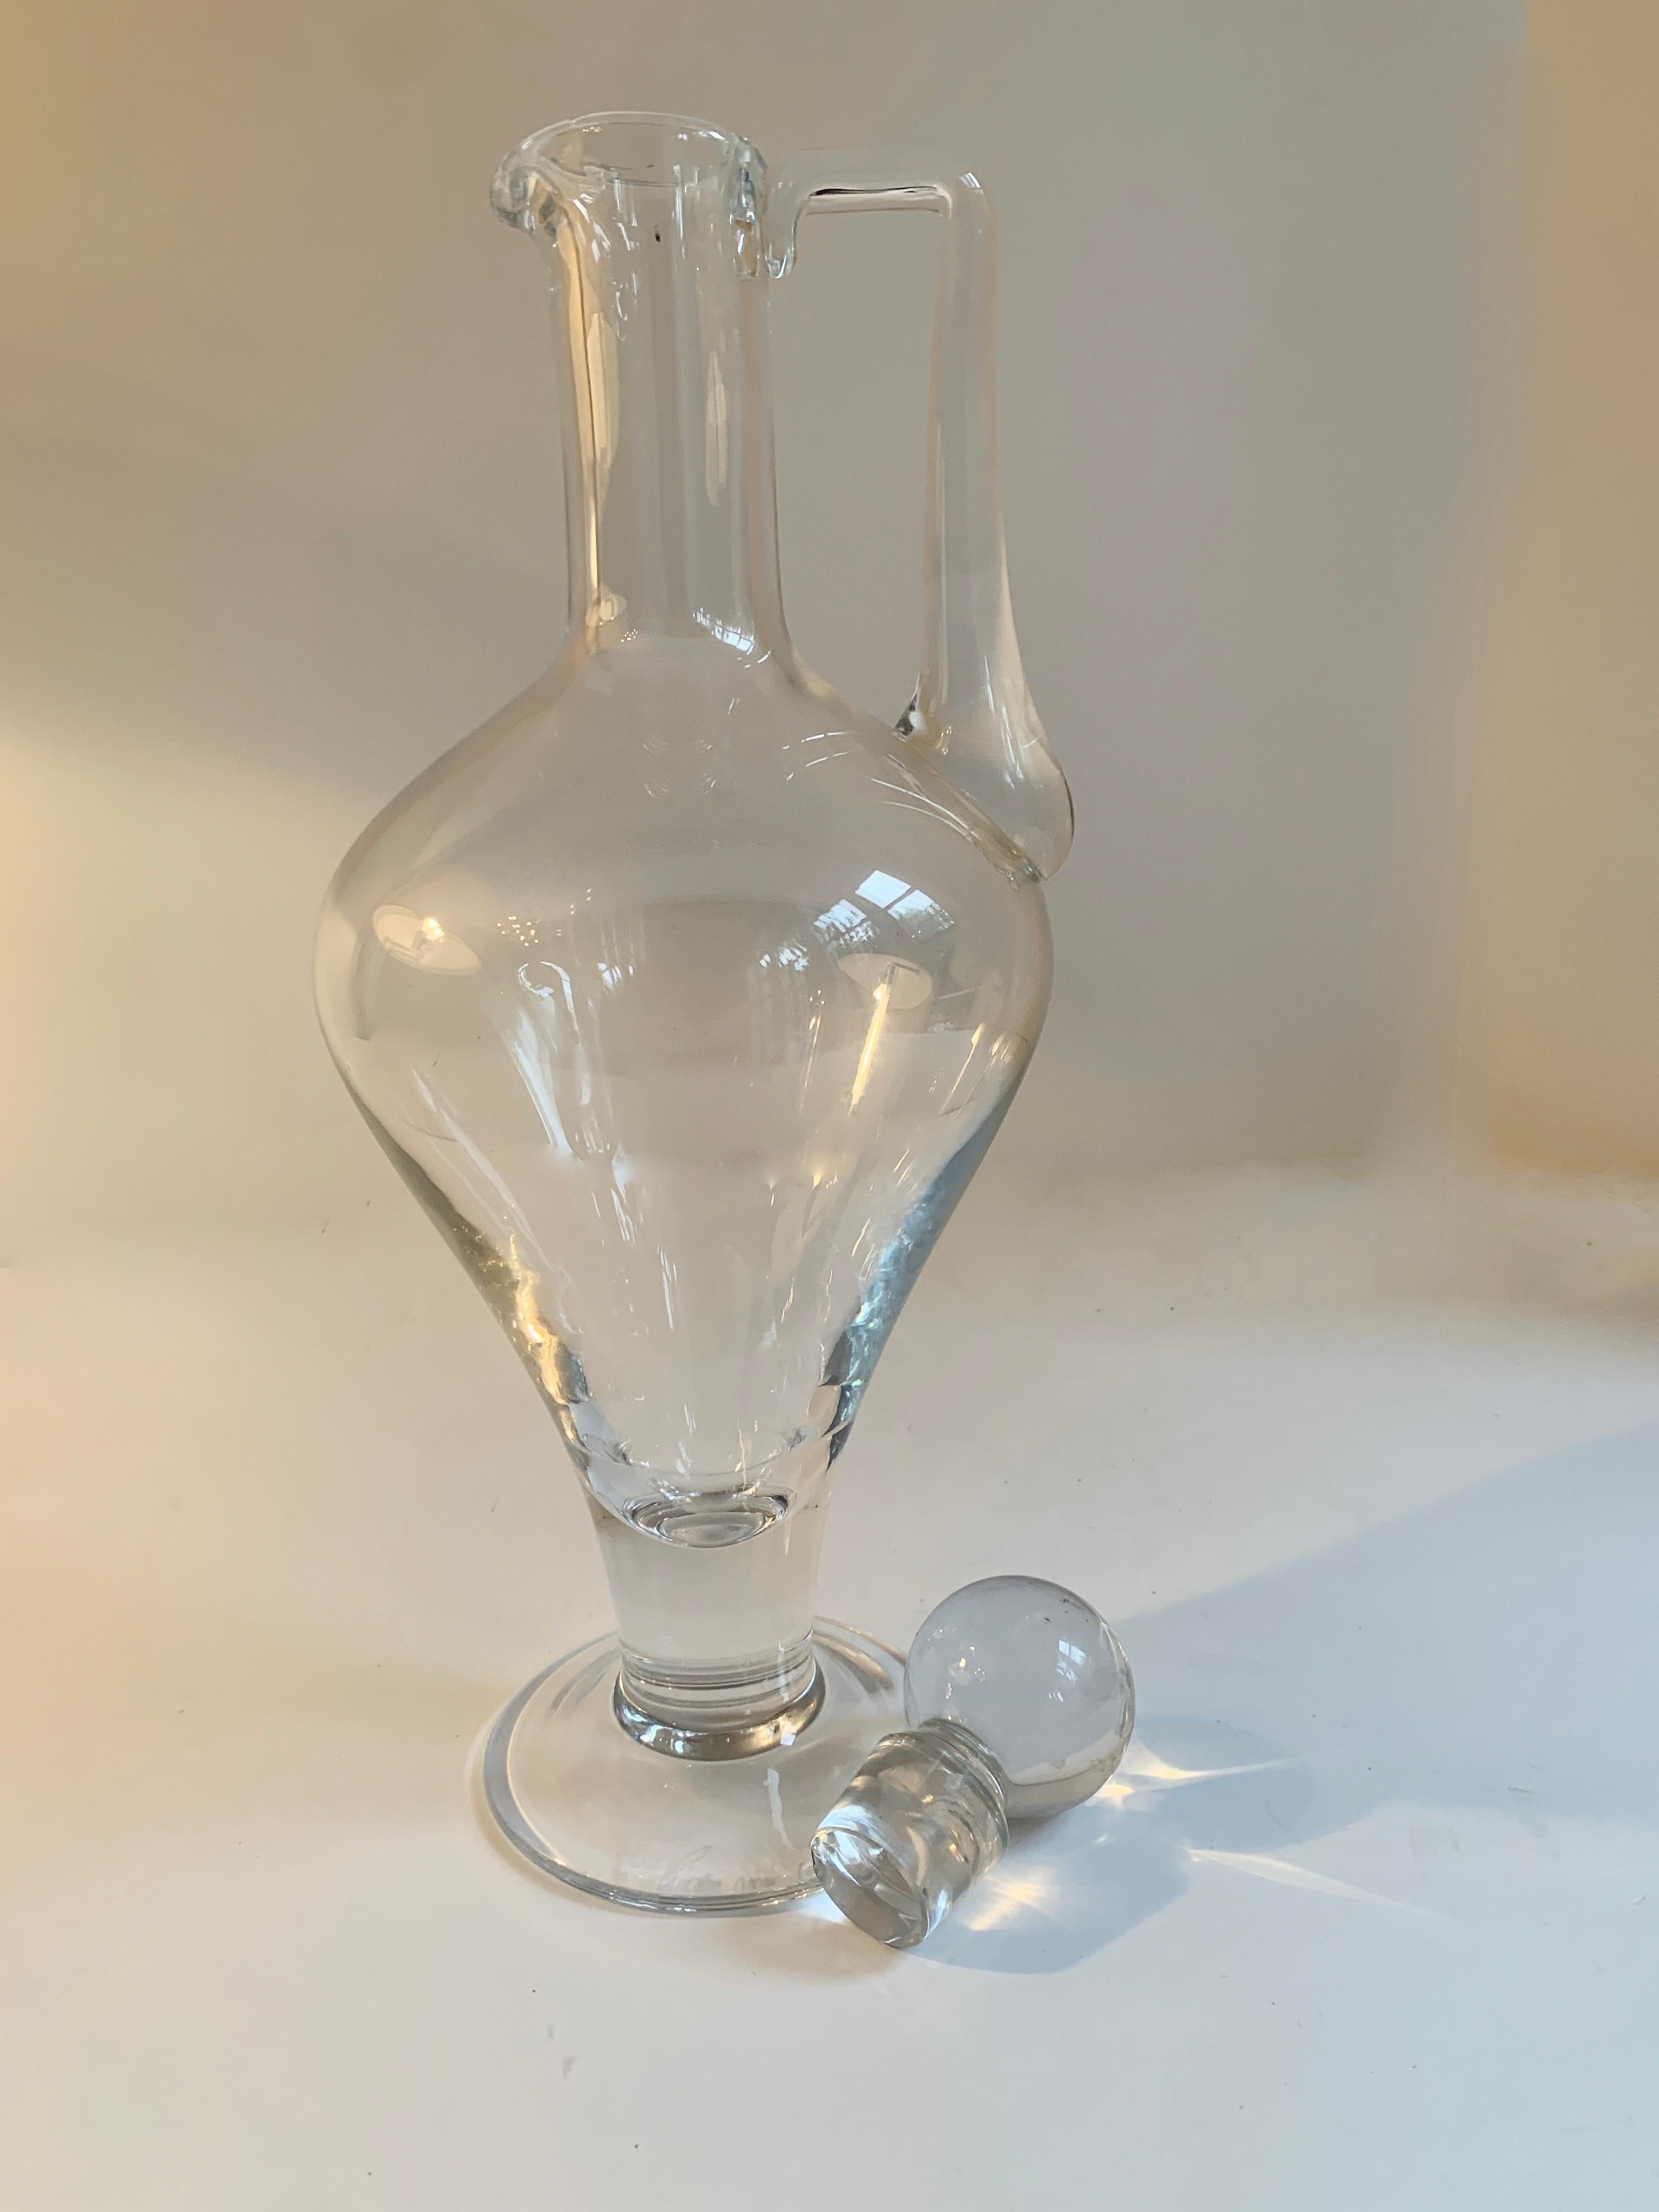 A beautifully designed and shaped decanter with stopper by the Boch Company, designed and signed by Eugen Von Boch. Perfect for the bar or to store water or other liquids for the table.